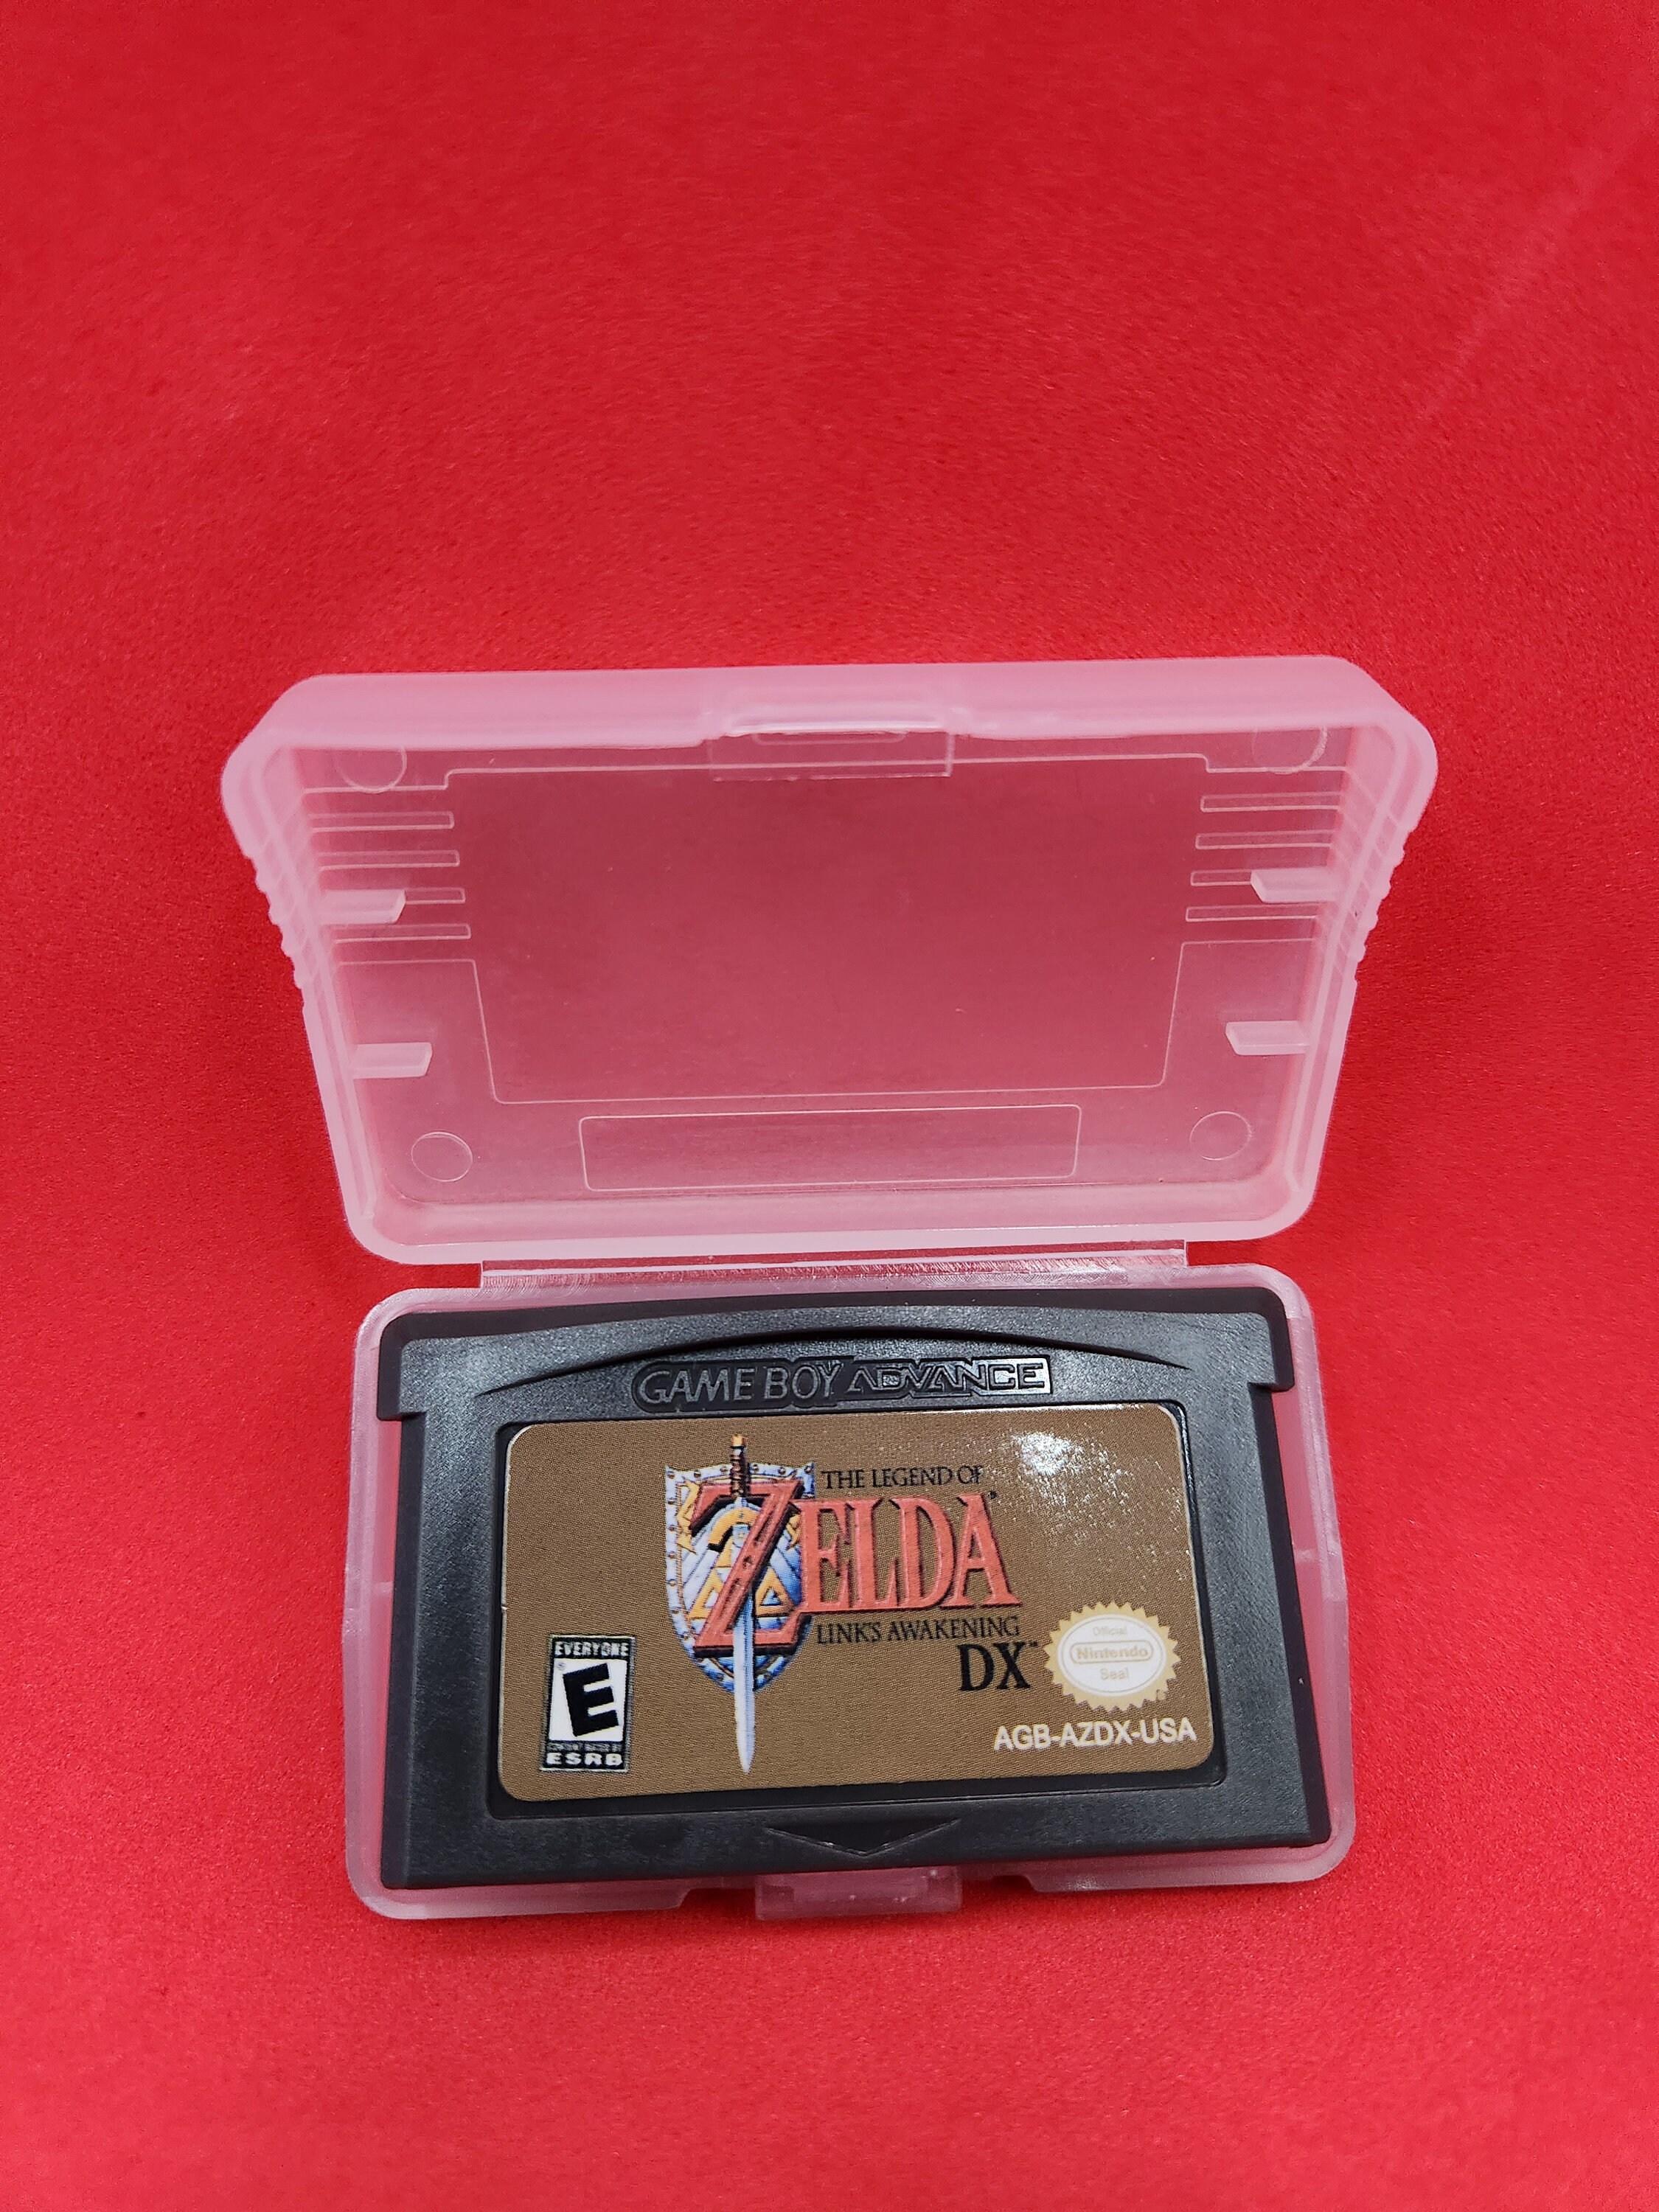 The Legend of Zelda: A Link to the Past Legit? : r/gameverifying